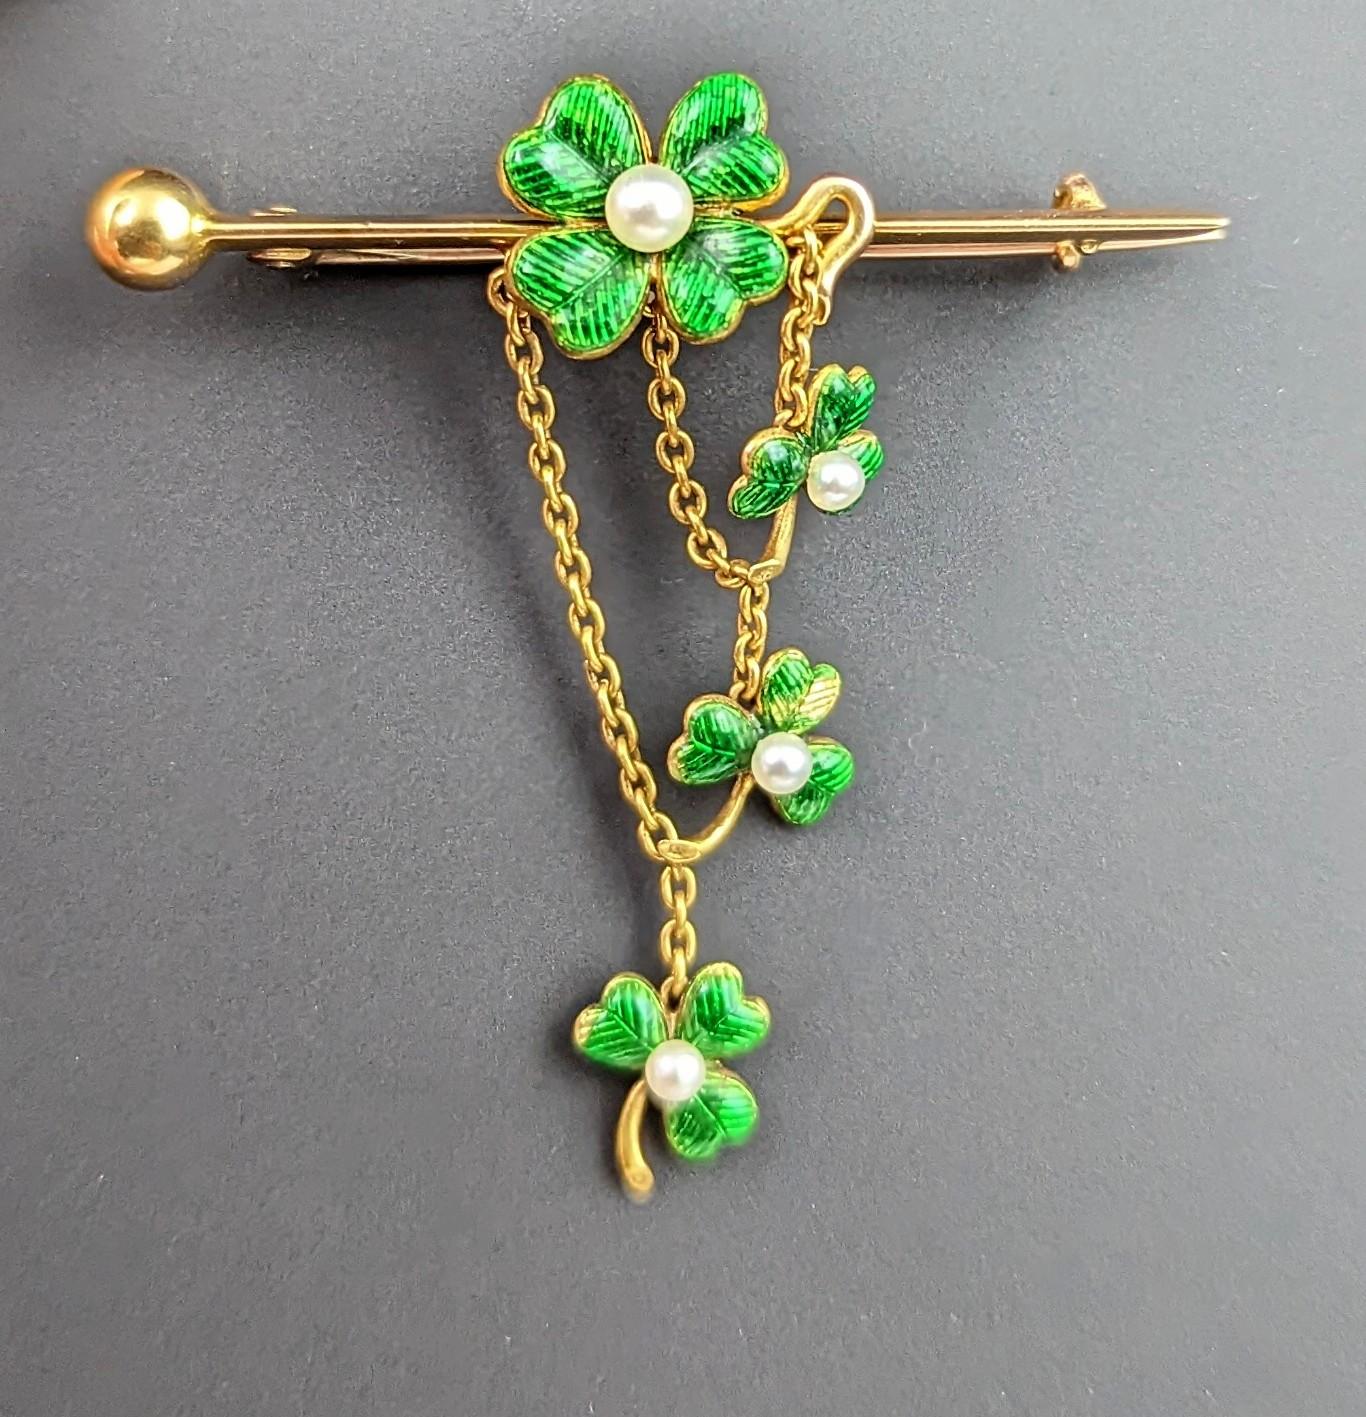 Antique Shamrock brooch, 15k gold, Guilloche enamel and seed pearl 3